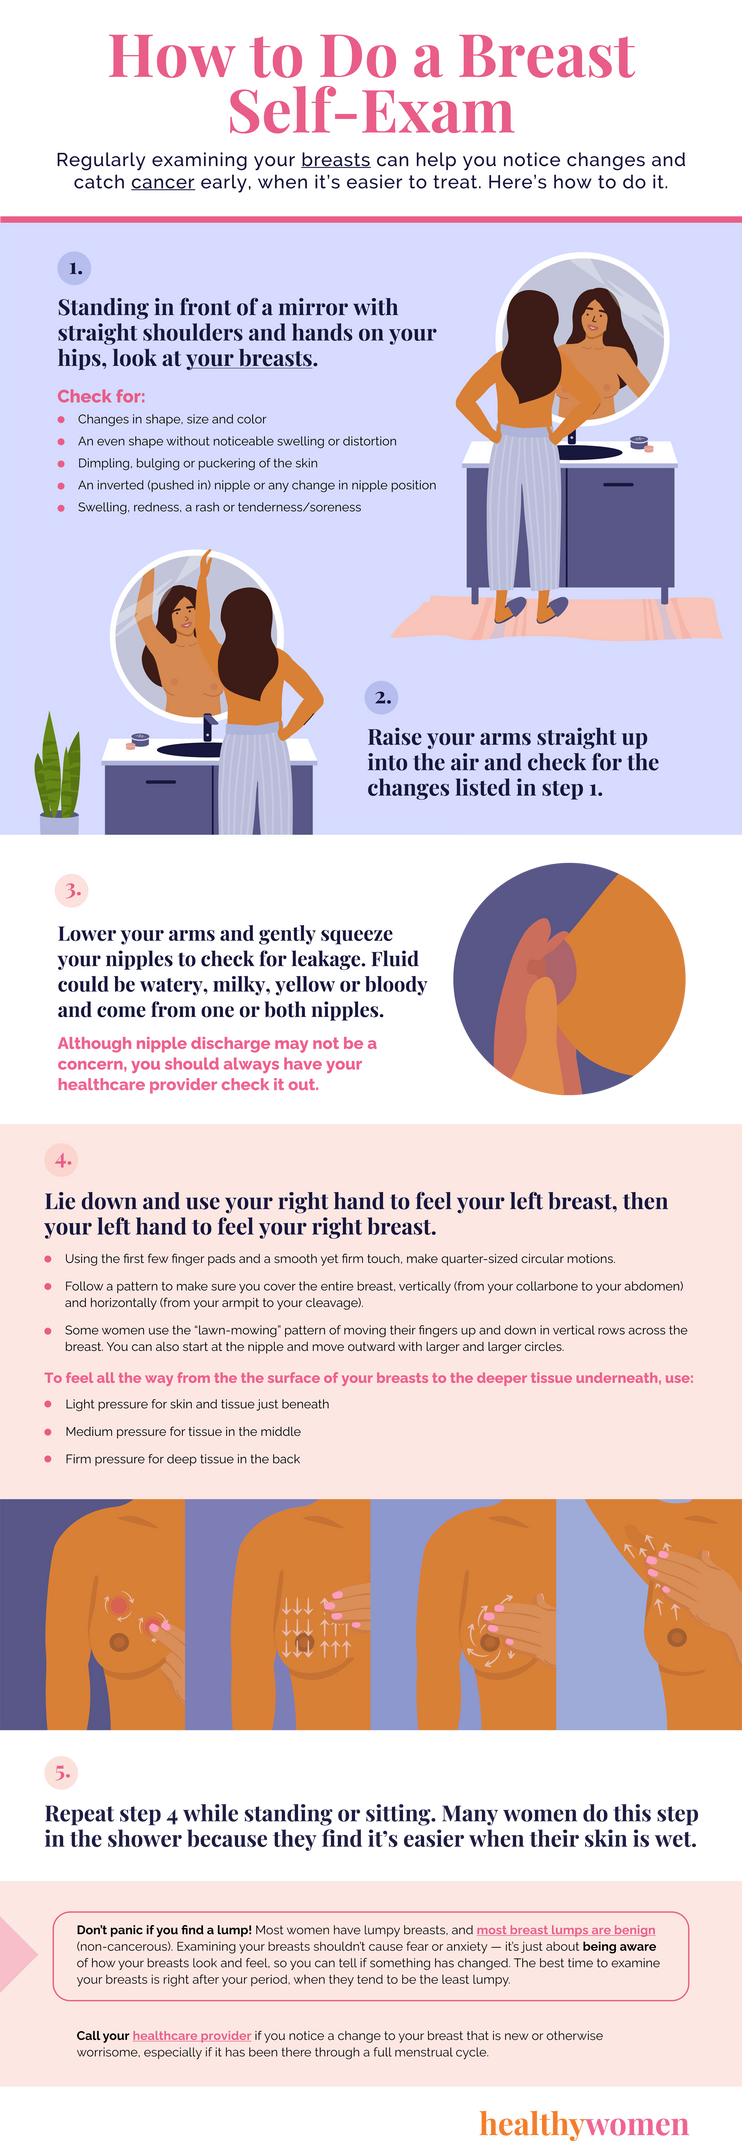 Healthy Breasts: A Guide to Caring for Your Breasts - HealthyWomen